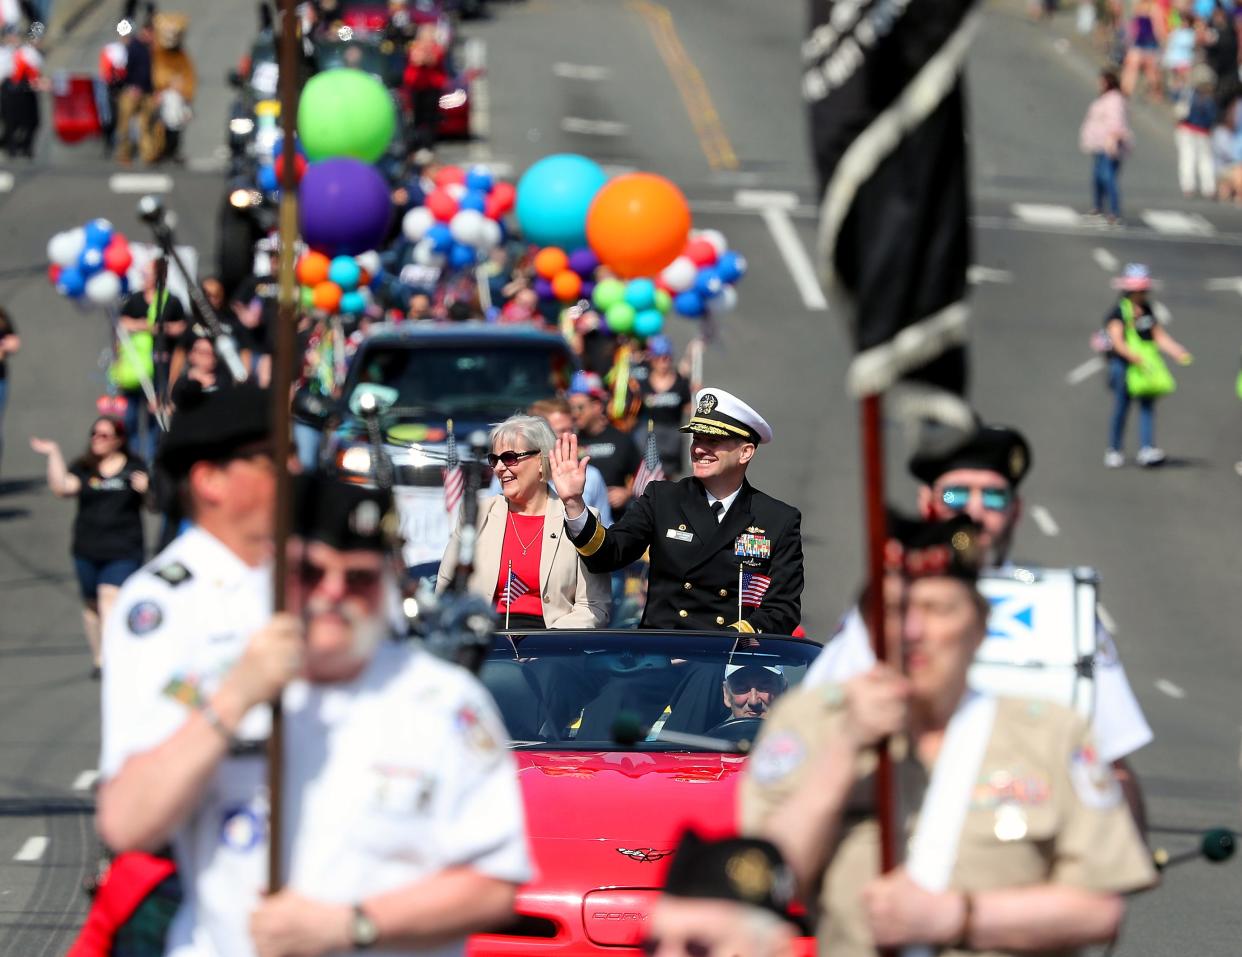 The 76th Armed Forces Day Parade Grand Marshall Rear Admiral Mark Behning, the commander of Submarine Group Nine and Task Group 114.3, waves to the crowd as the parade moves down 6th in Bremerton on Saturday, May 20, 2023.